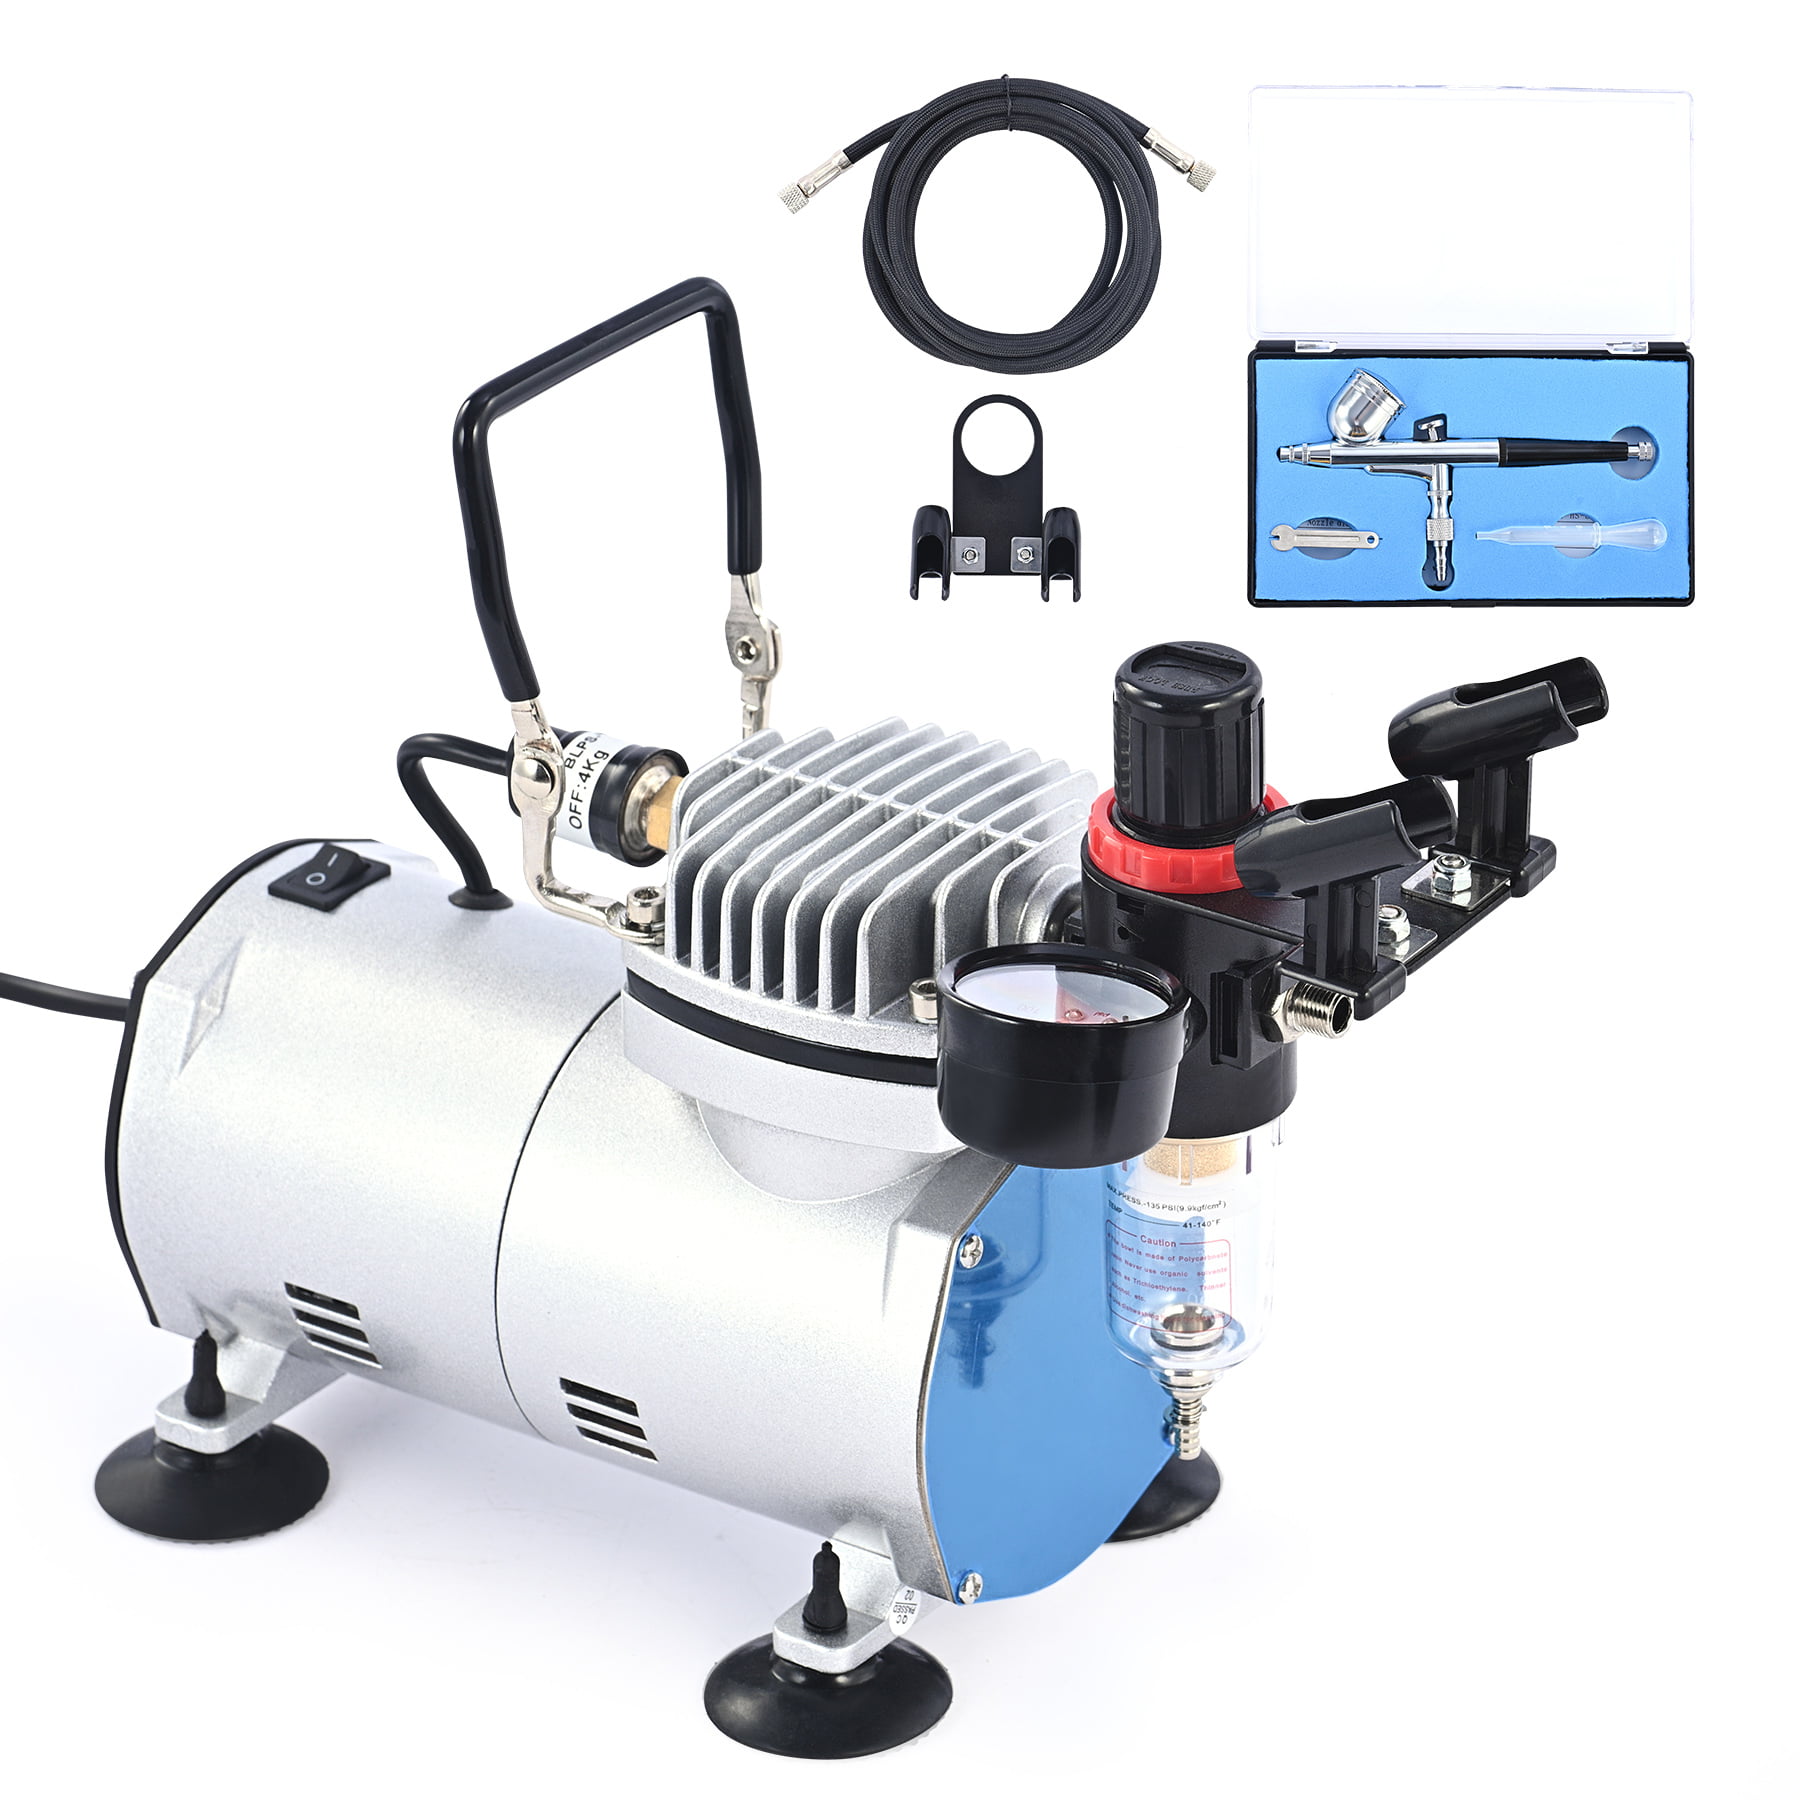 20-23 L/min Automatic Air Compressor Double Action Airbrush Spray Kit Paint Tool